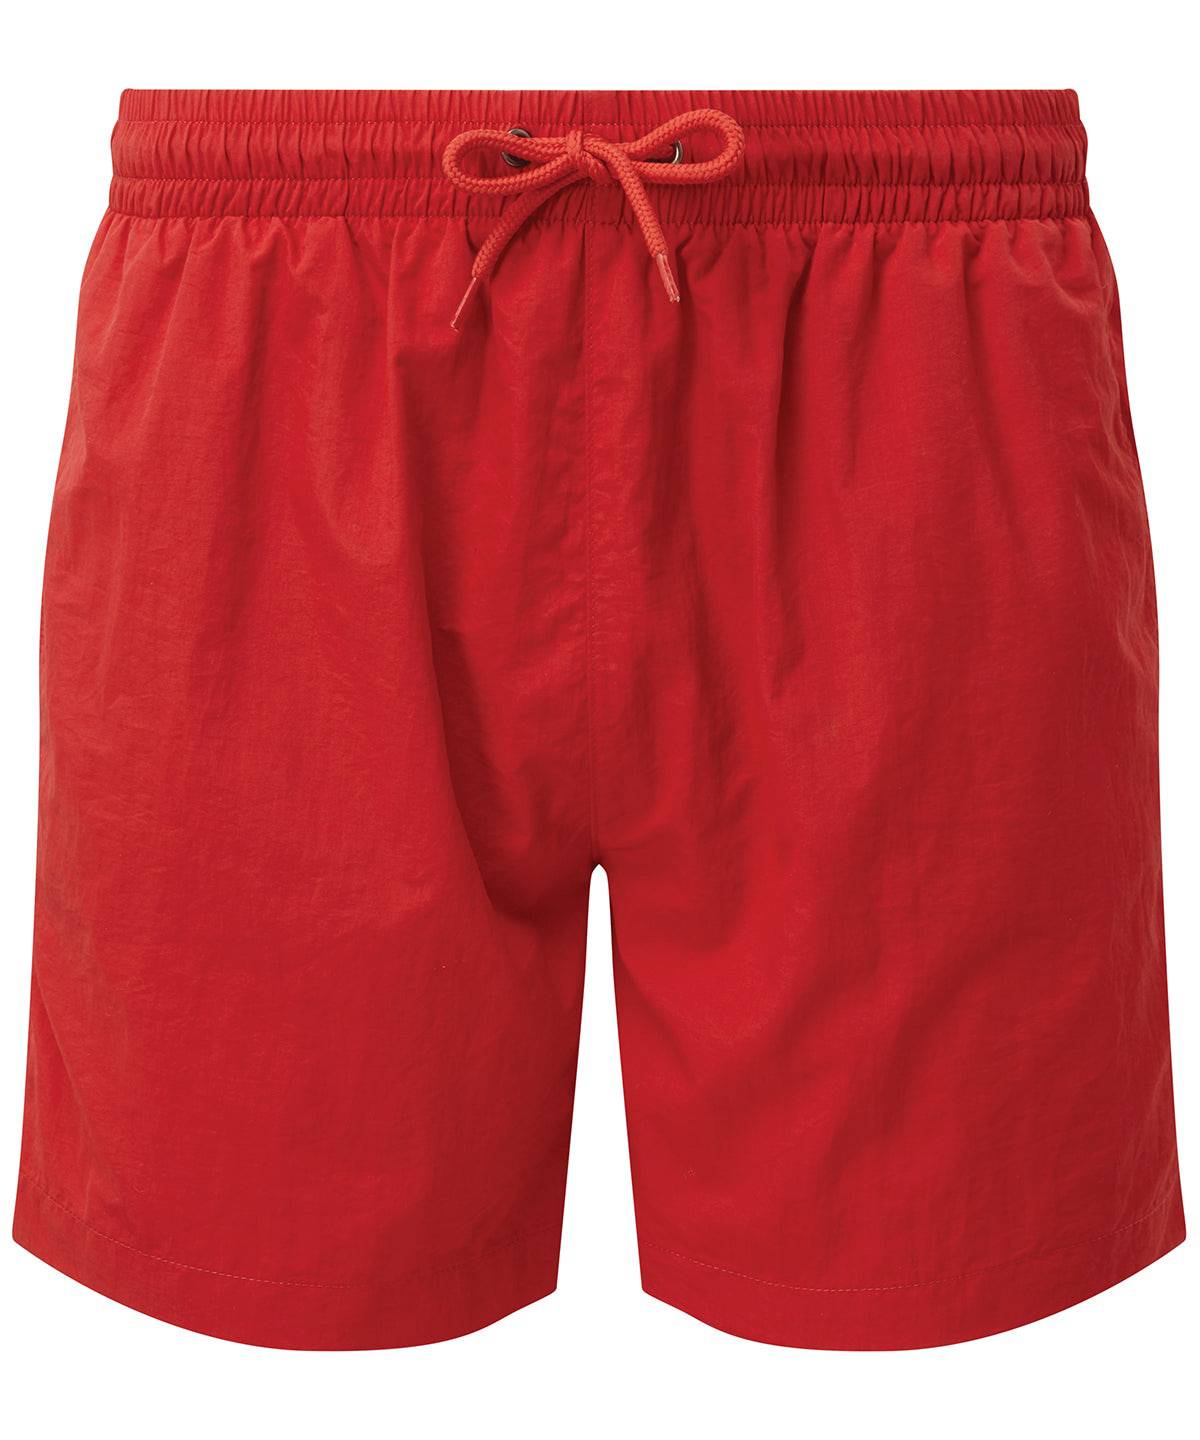 Red/Red - Swim shorts